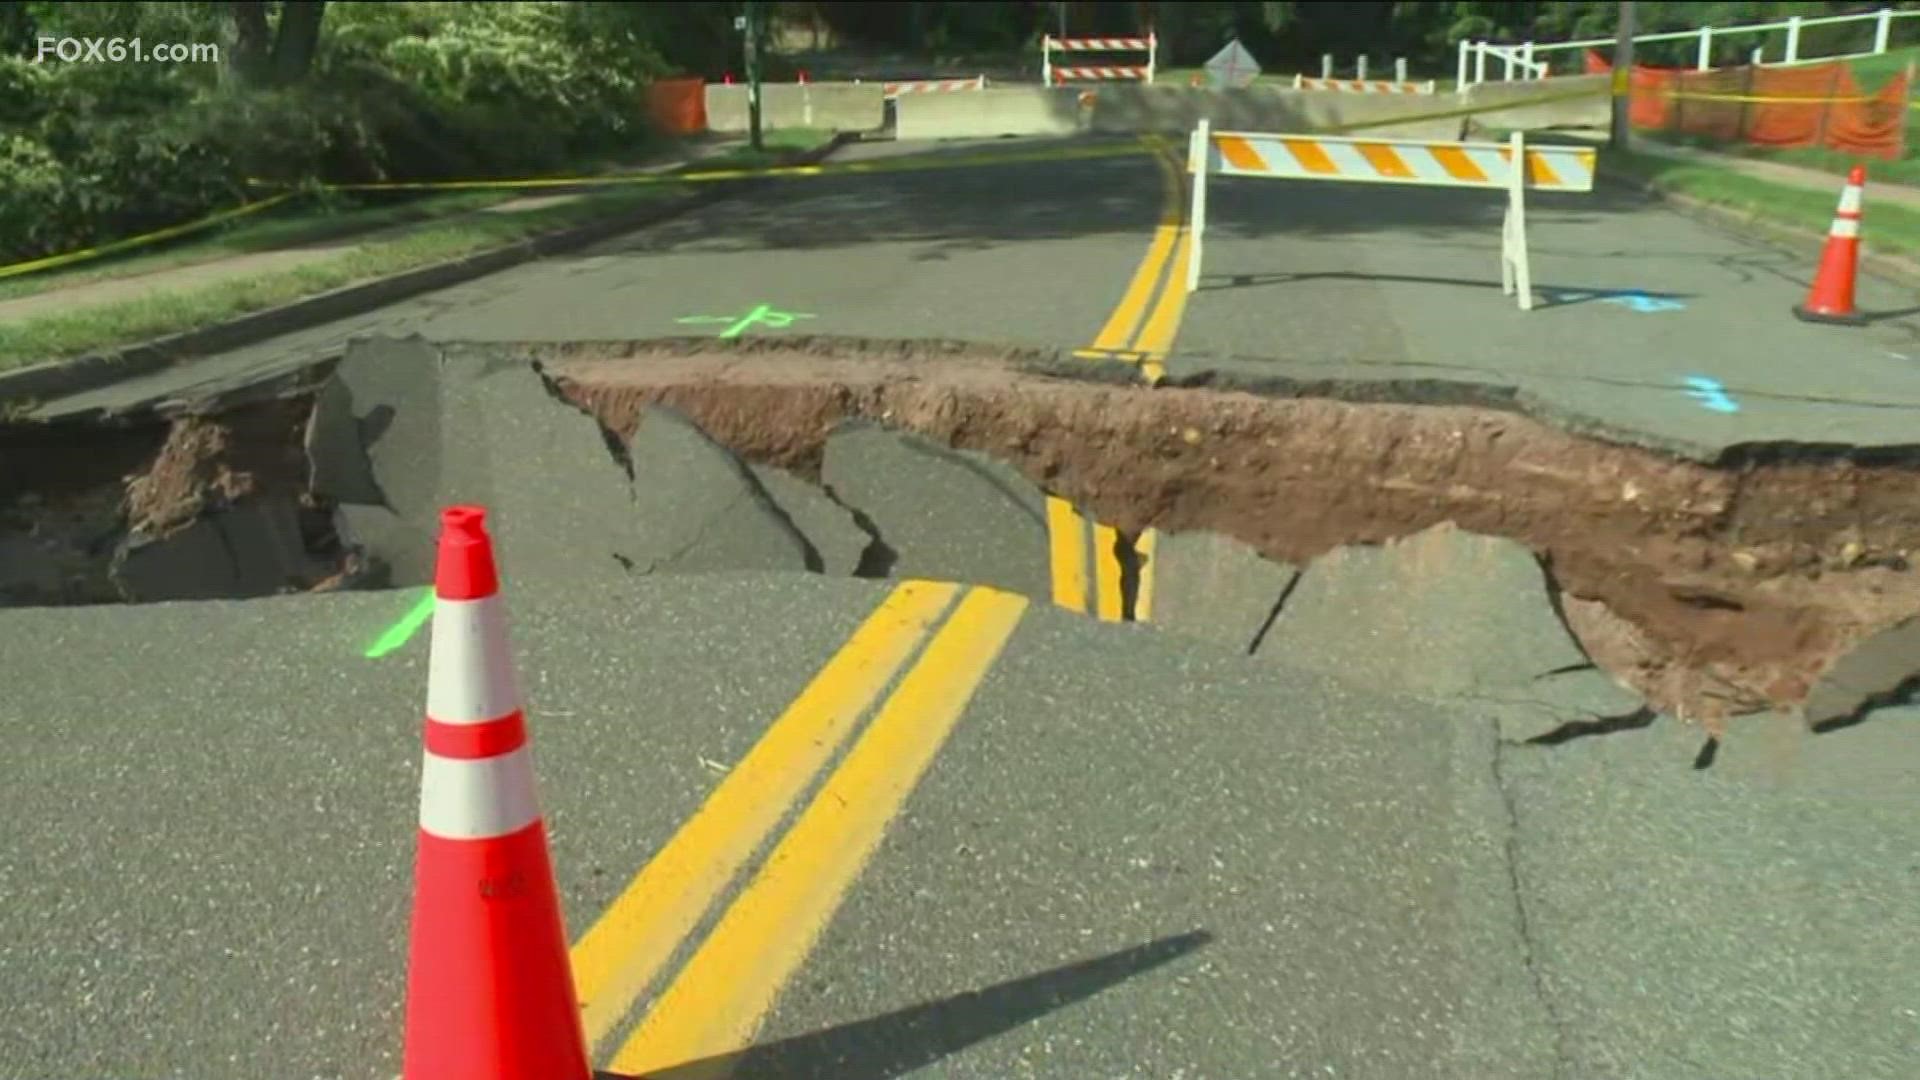 Full repairs to a washed out road could take months, officials say.